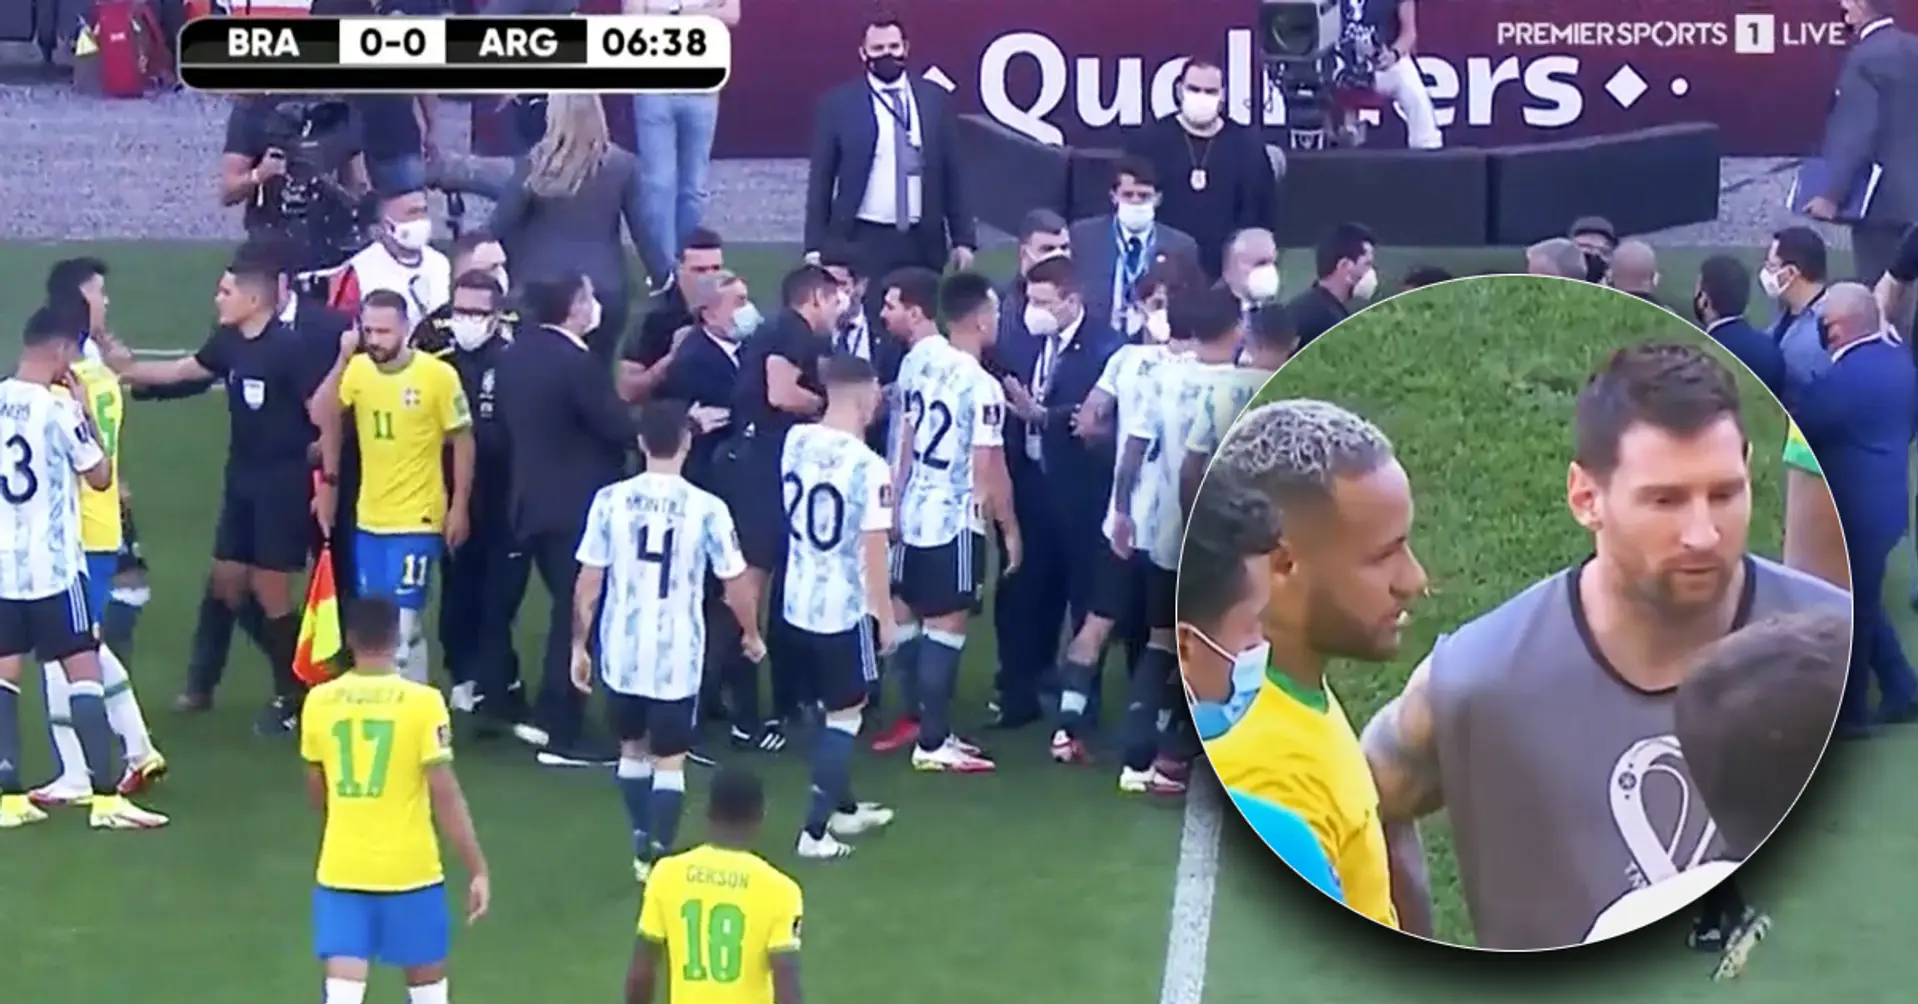 Police interrupts Brazil vs Argentina to deport 4 players for lying to enter the country